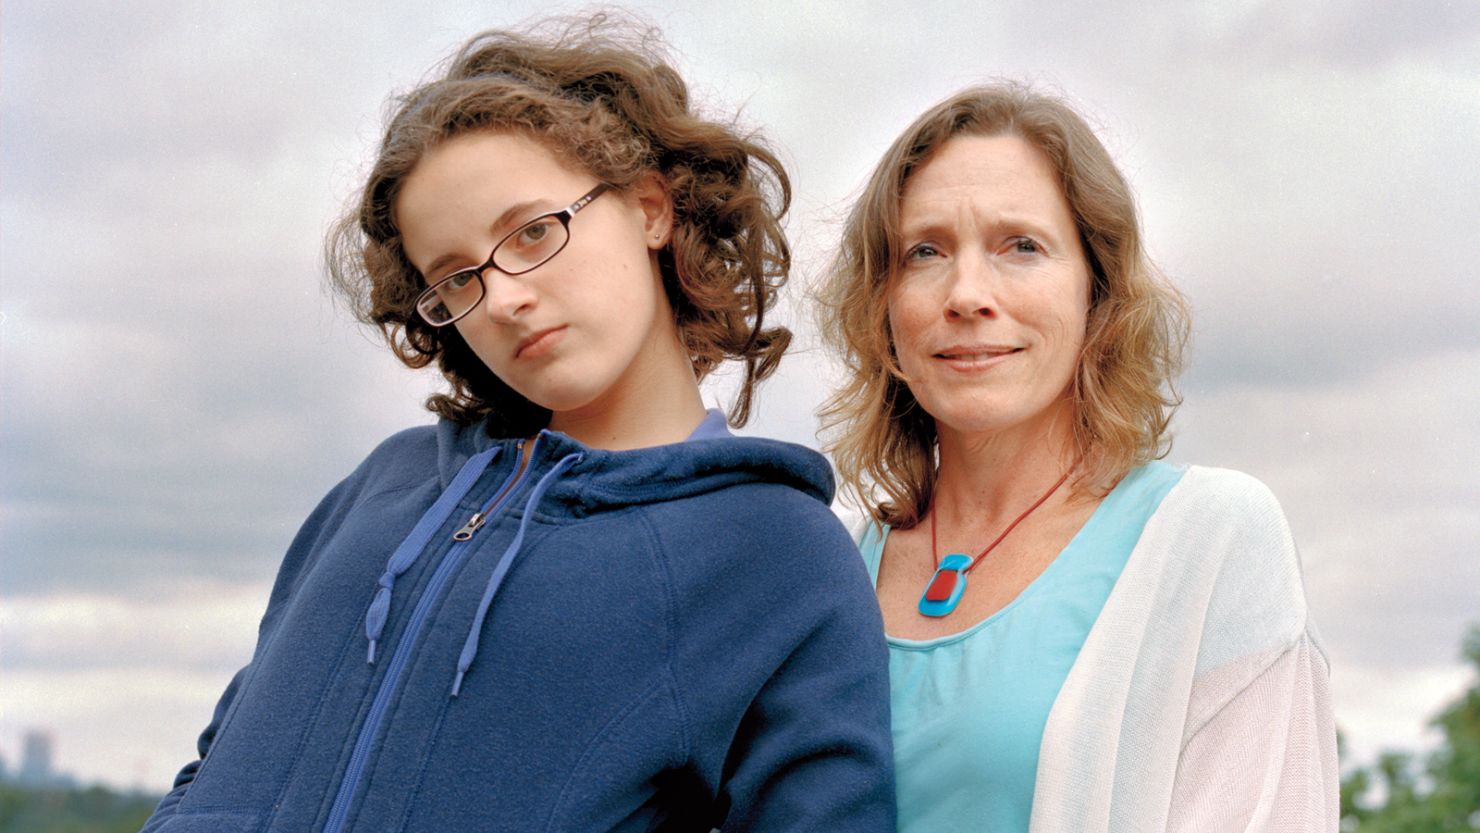 Sue Sanders and her daughter, Lizzie, had to move on after Sanders' first husband was diagnosed with bipolar disorder.